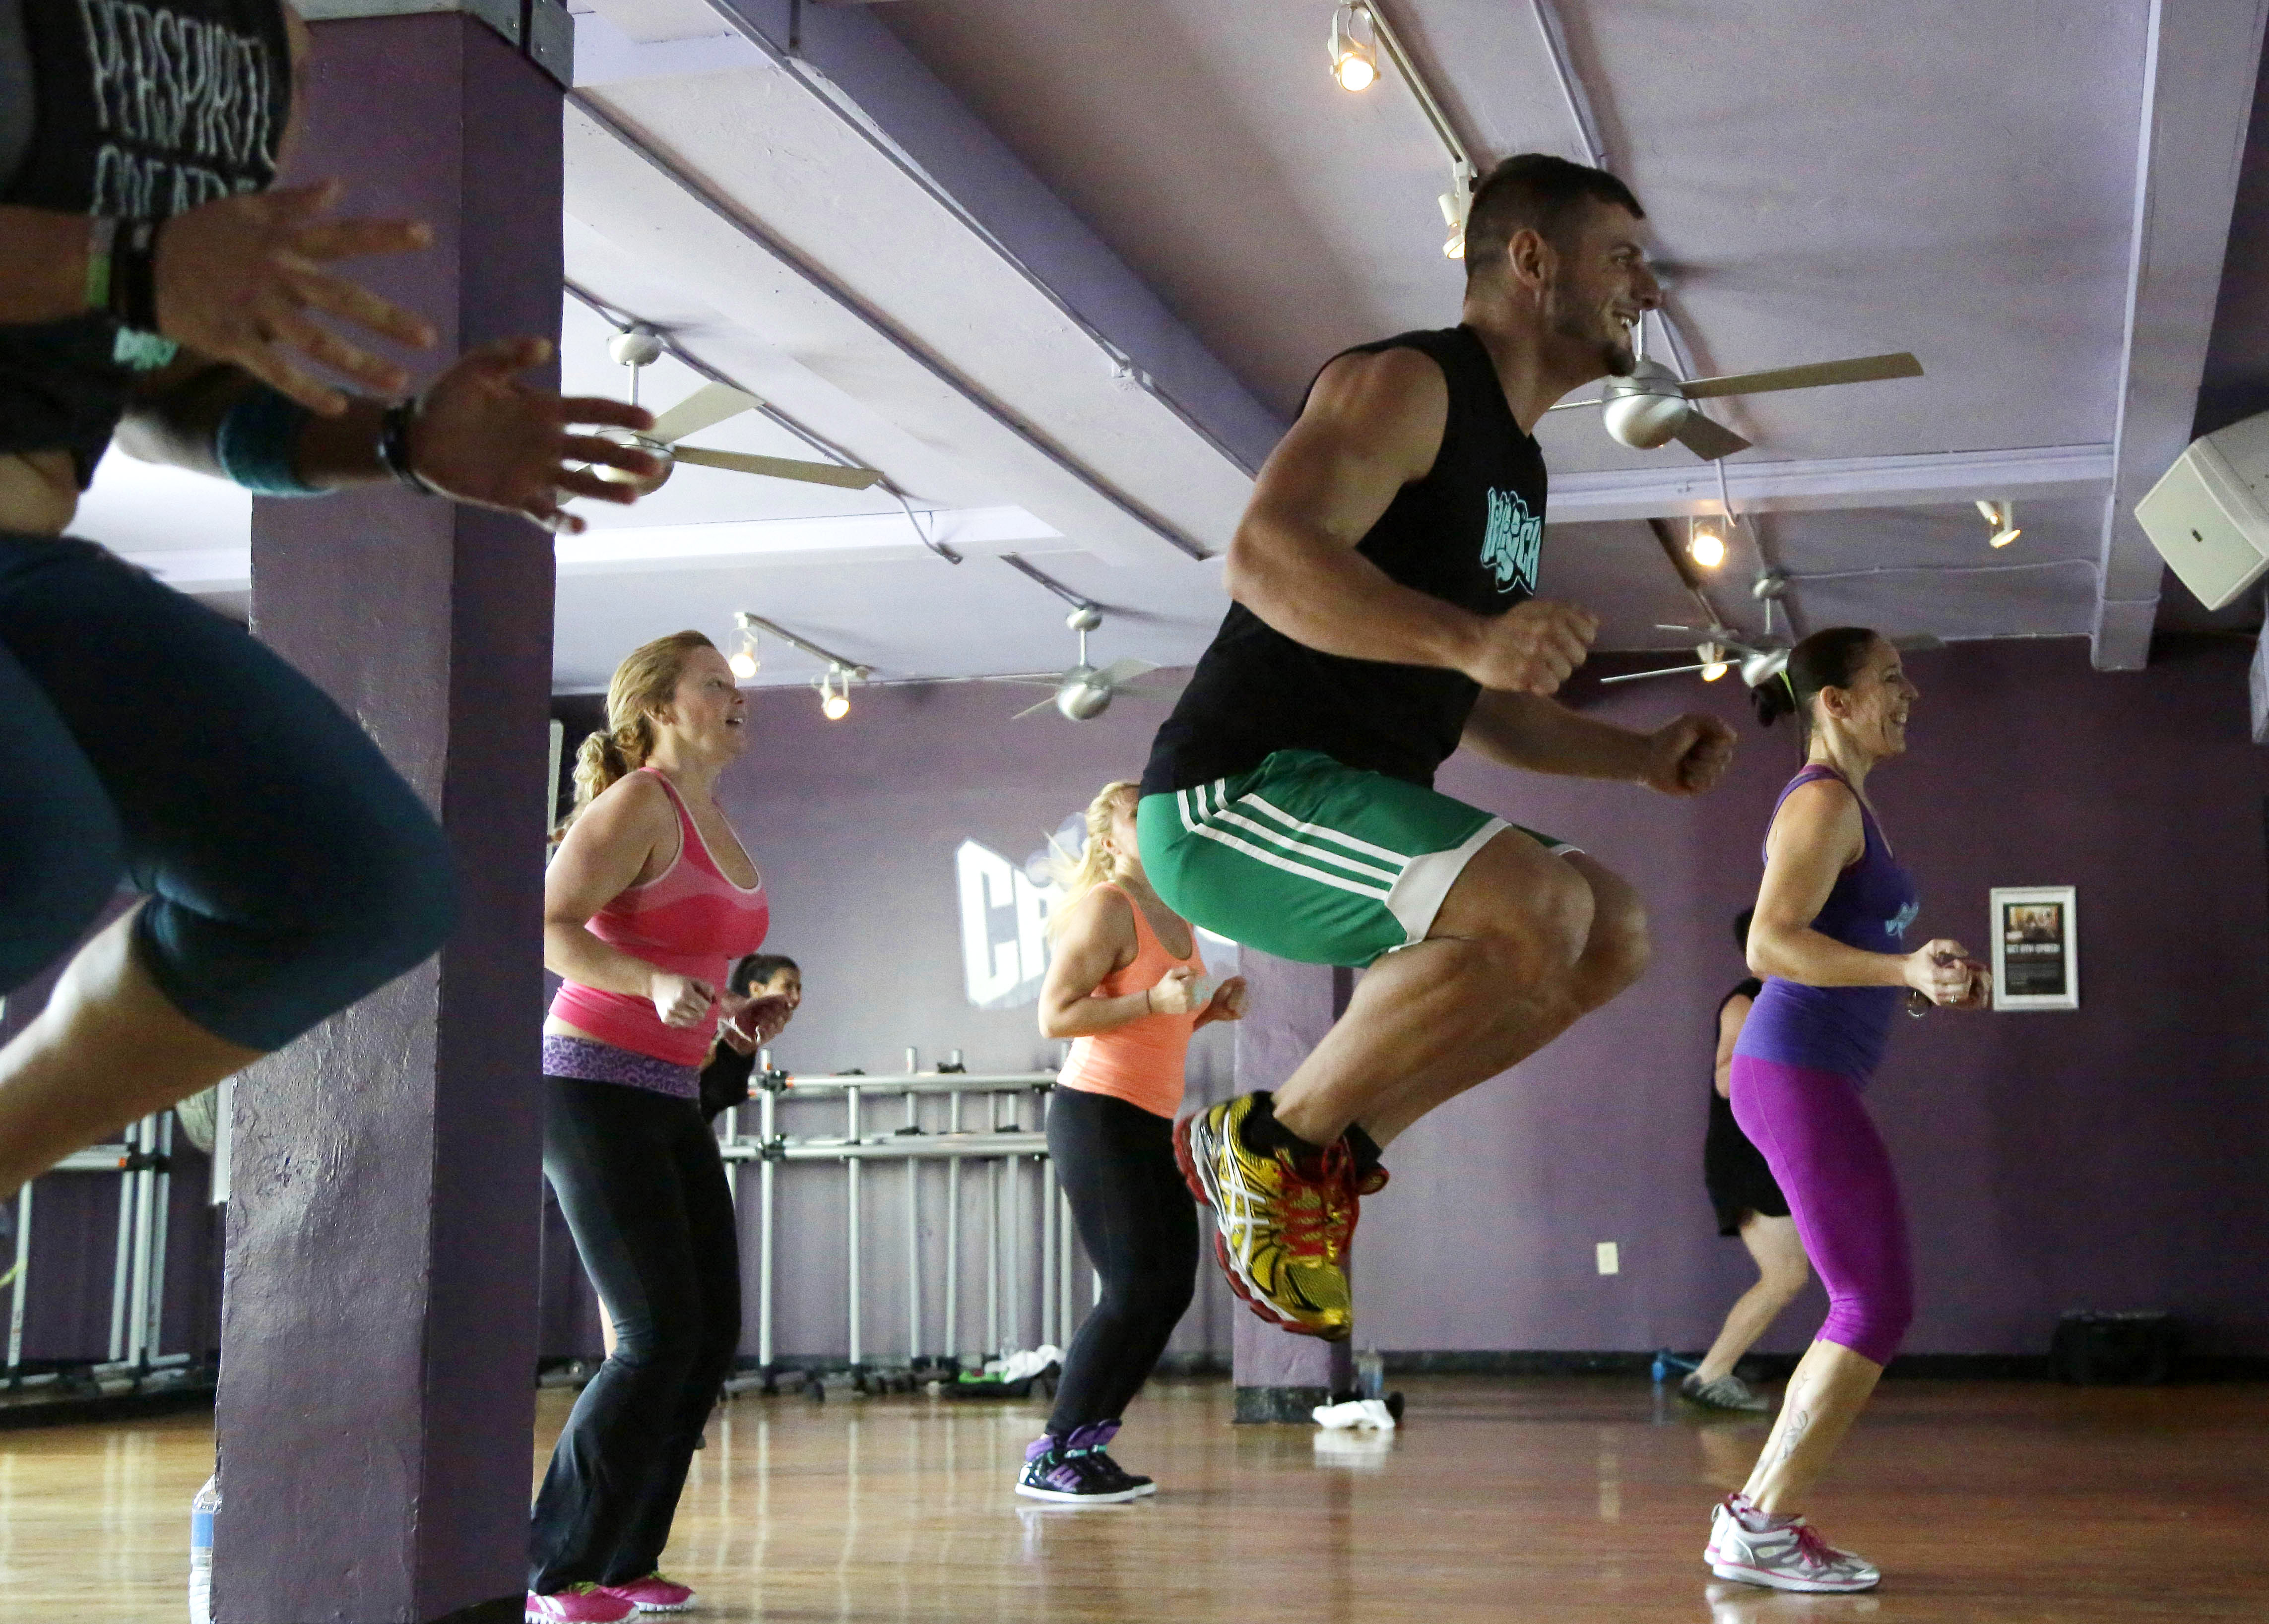 My 8 Favorite Hacks to Take Group Fitness Classes Without Paying Full Price